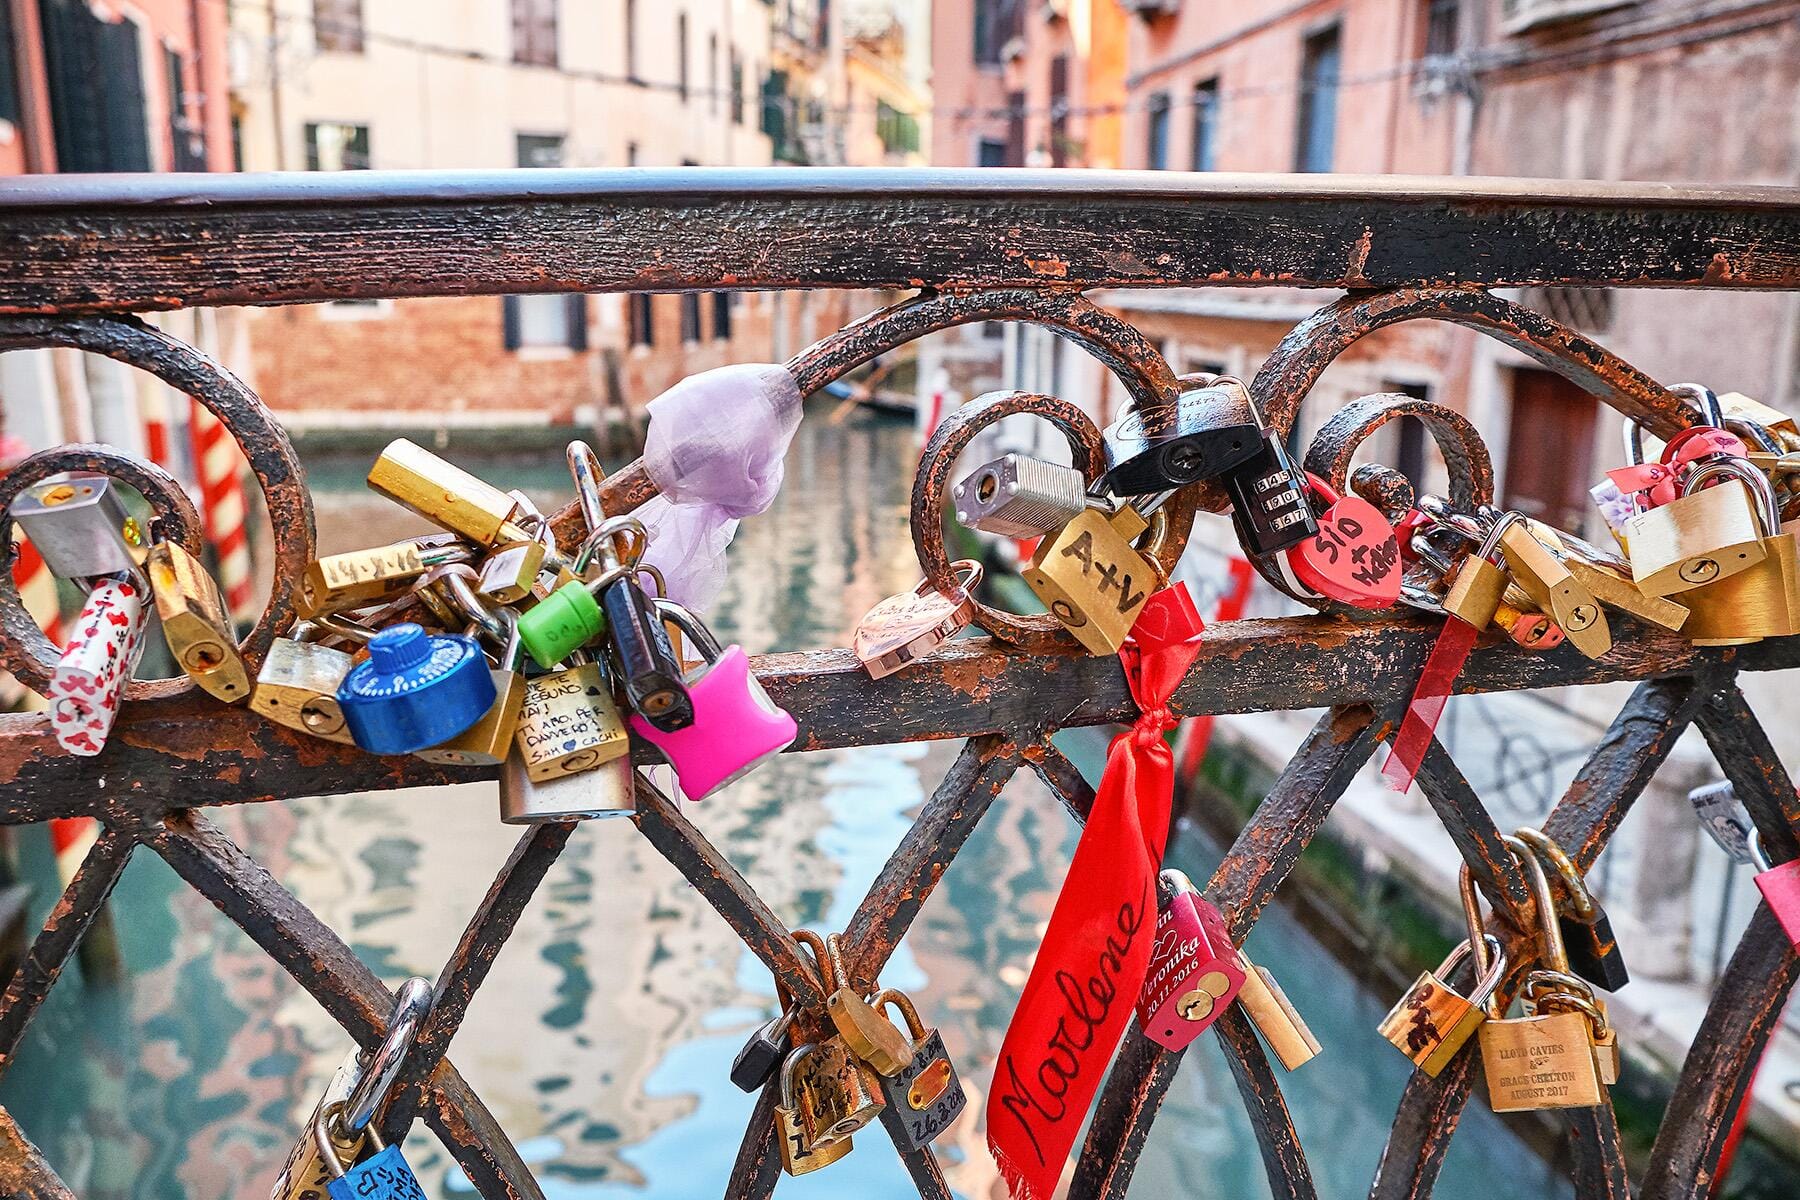 <a href='https://www.fodors.com/world/europe/italy/venice/experiences/news/photos/dont-do-these-things-in-venice-italy#'>From &quot;10 Things You Should NEVER Do if Visiting Venice: Don’t Attach Padlocks to Bridges &quot;</a>